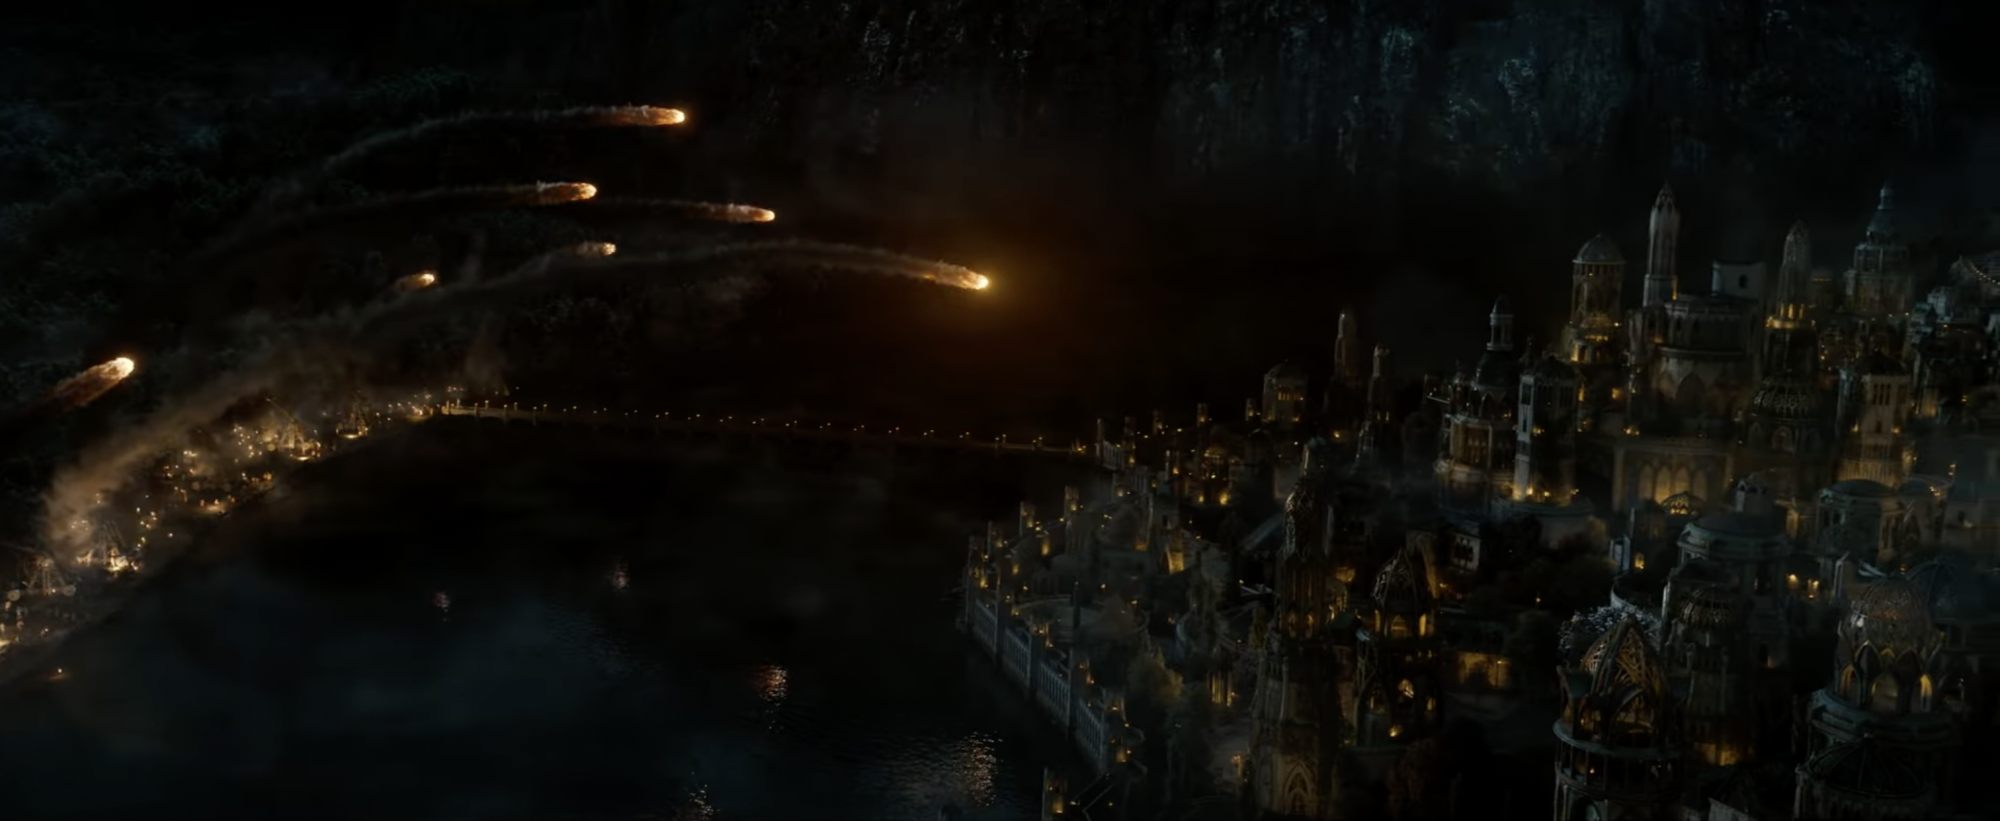 An army of catapults launches fiery rocks at an Elven city.